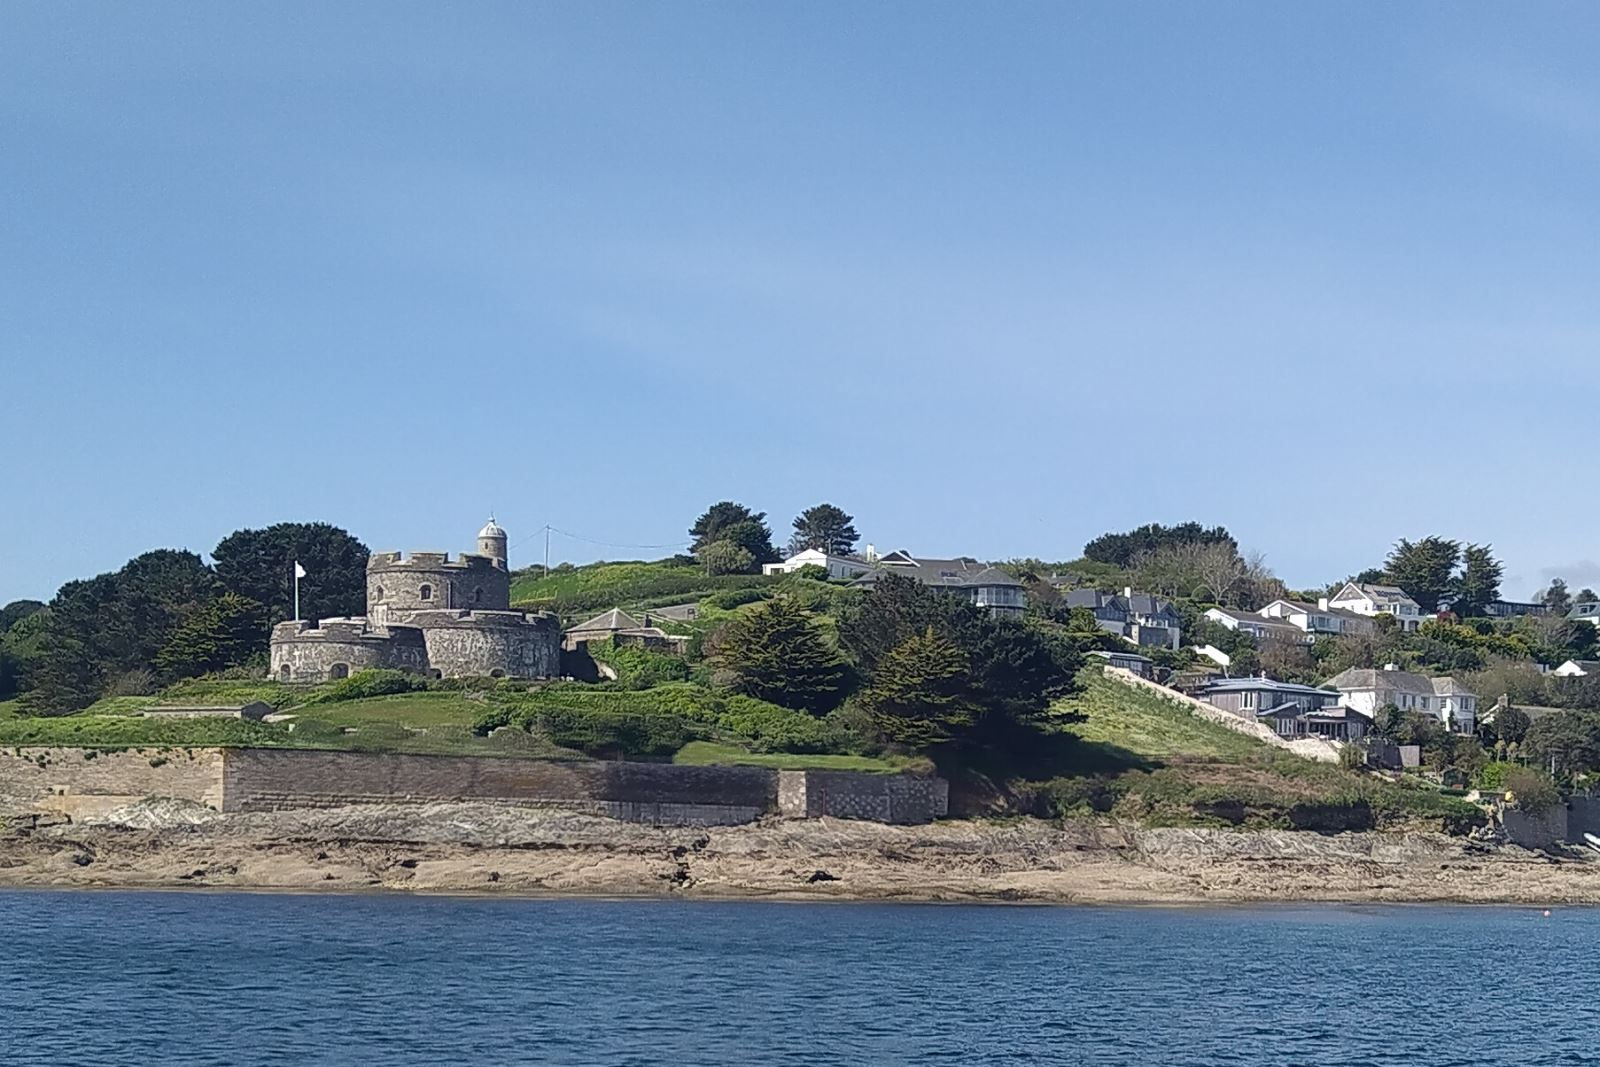 St Mawes from the ferry